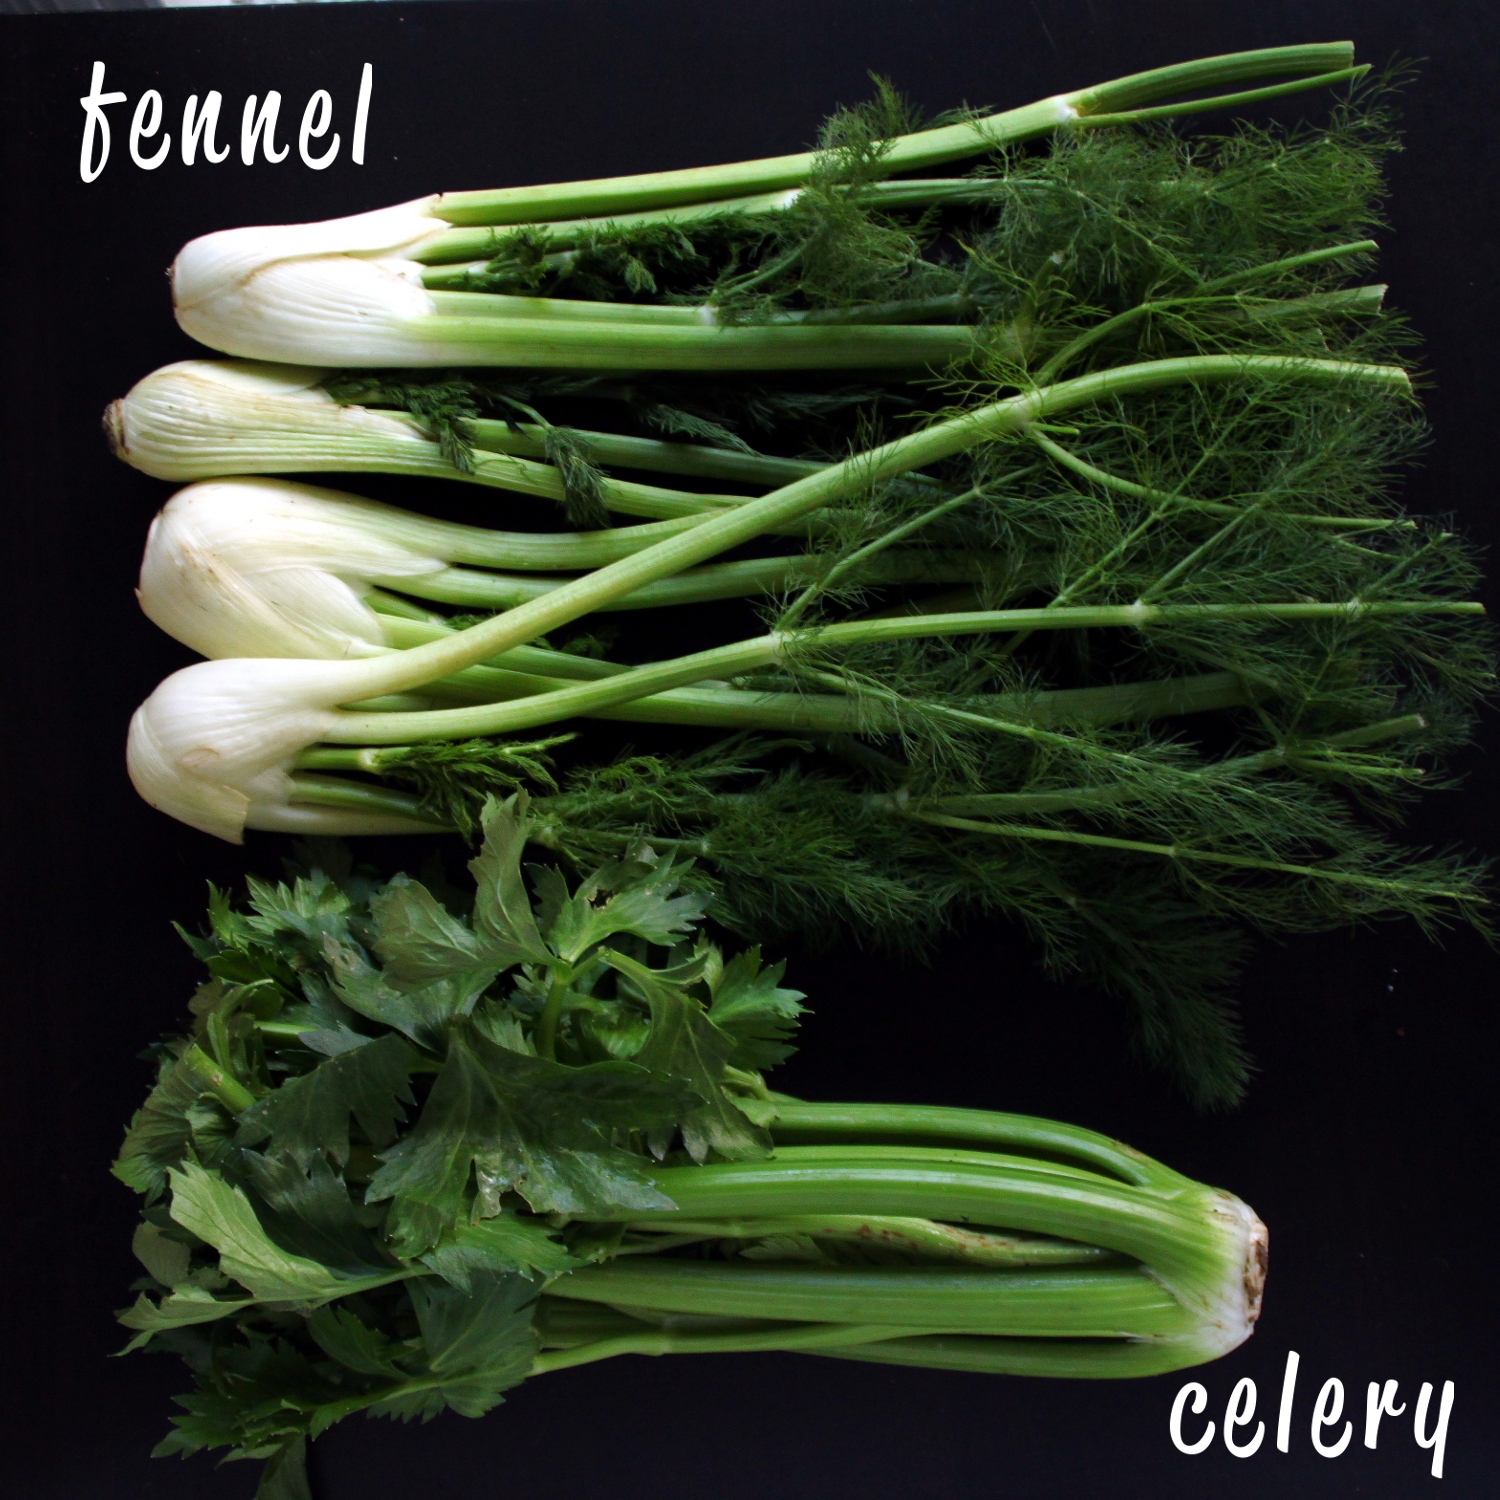 fennel, celery, and other fresh produce on a dark table